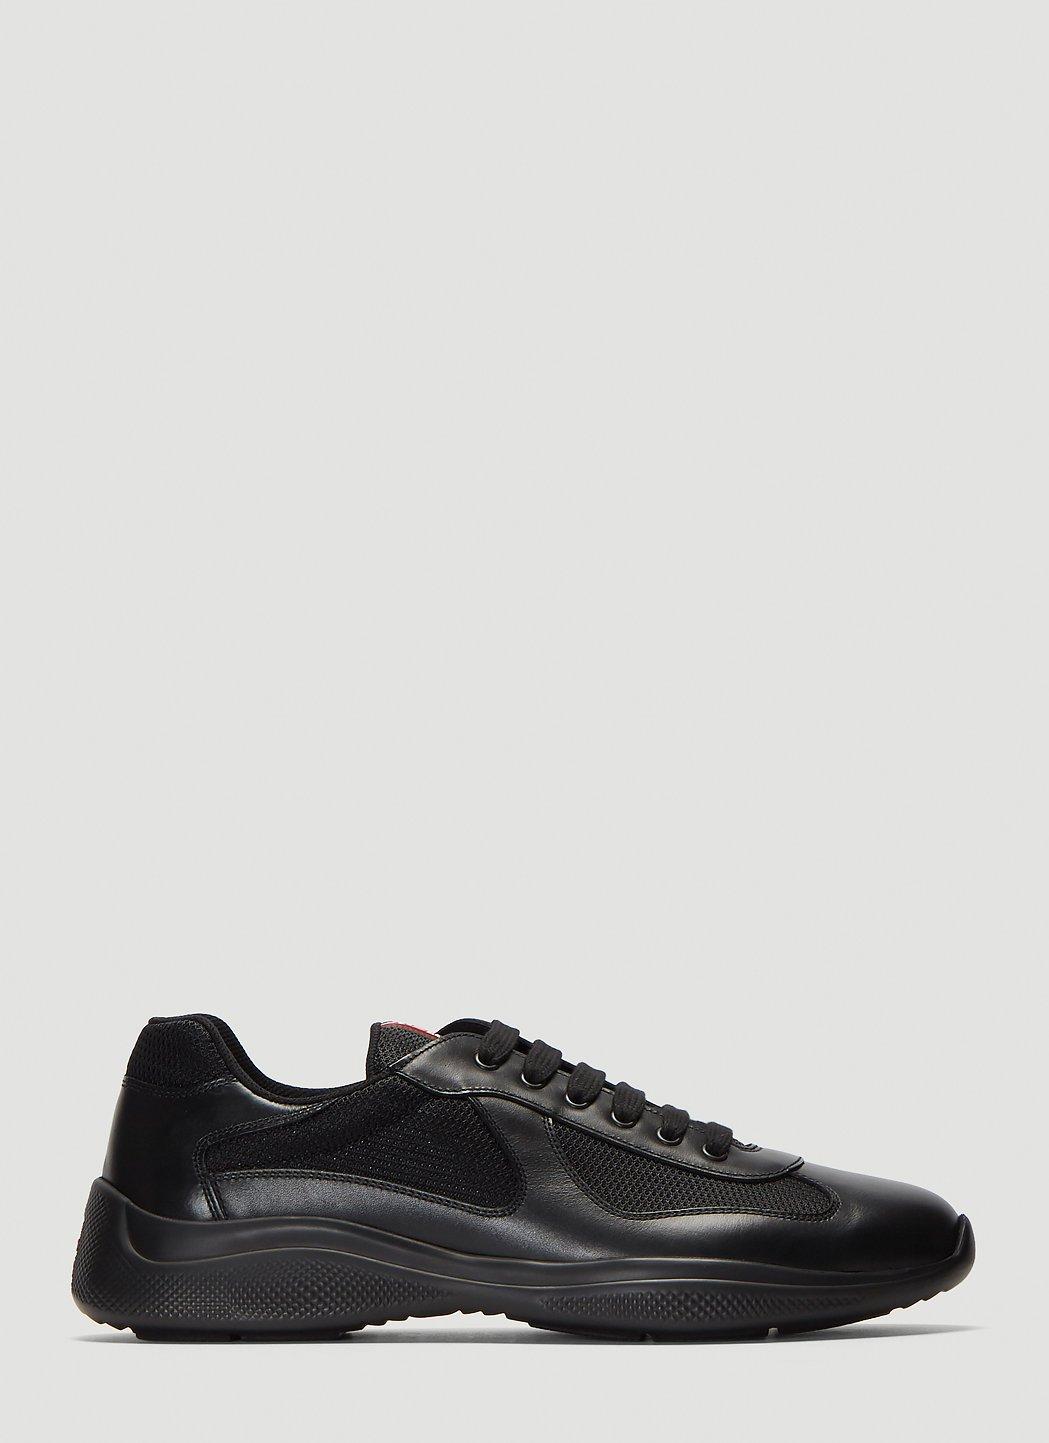 Prada Leather Americas Cup Lace-up Sneakers In Black for Men - Lyst